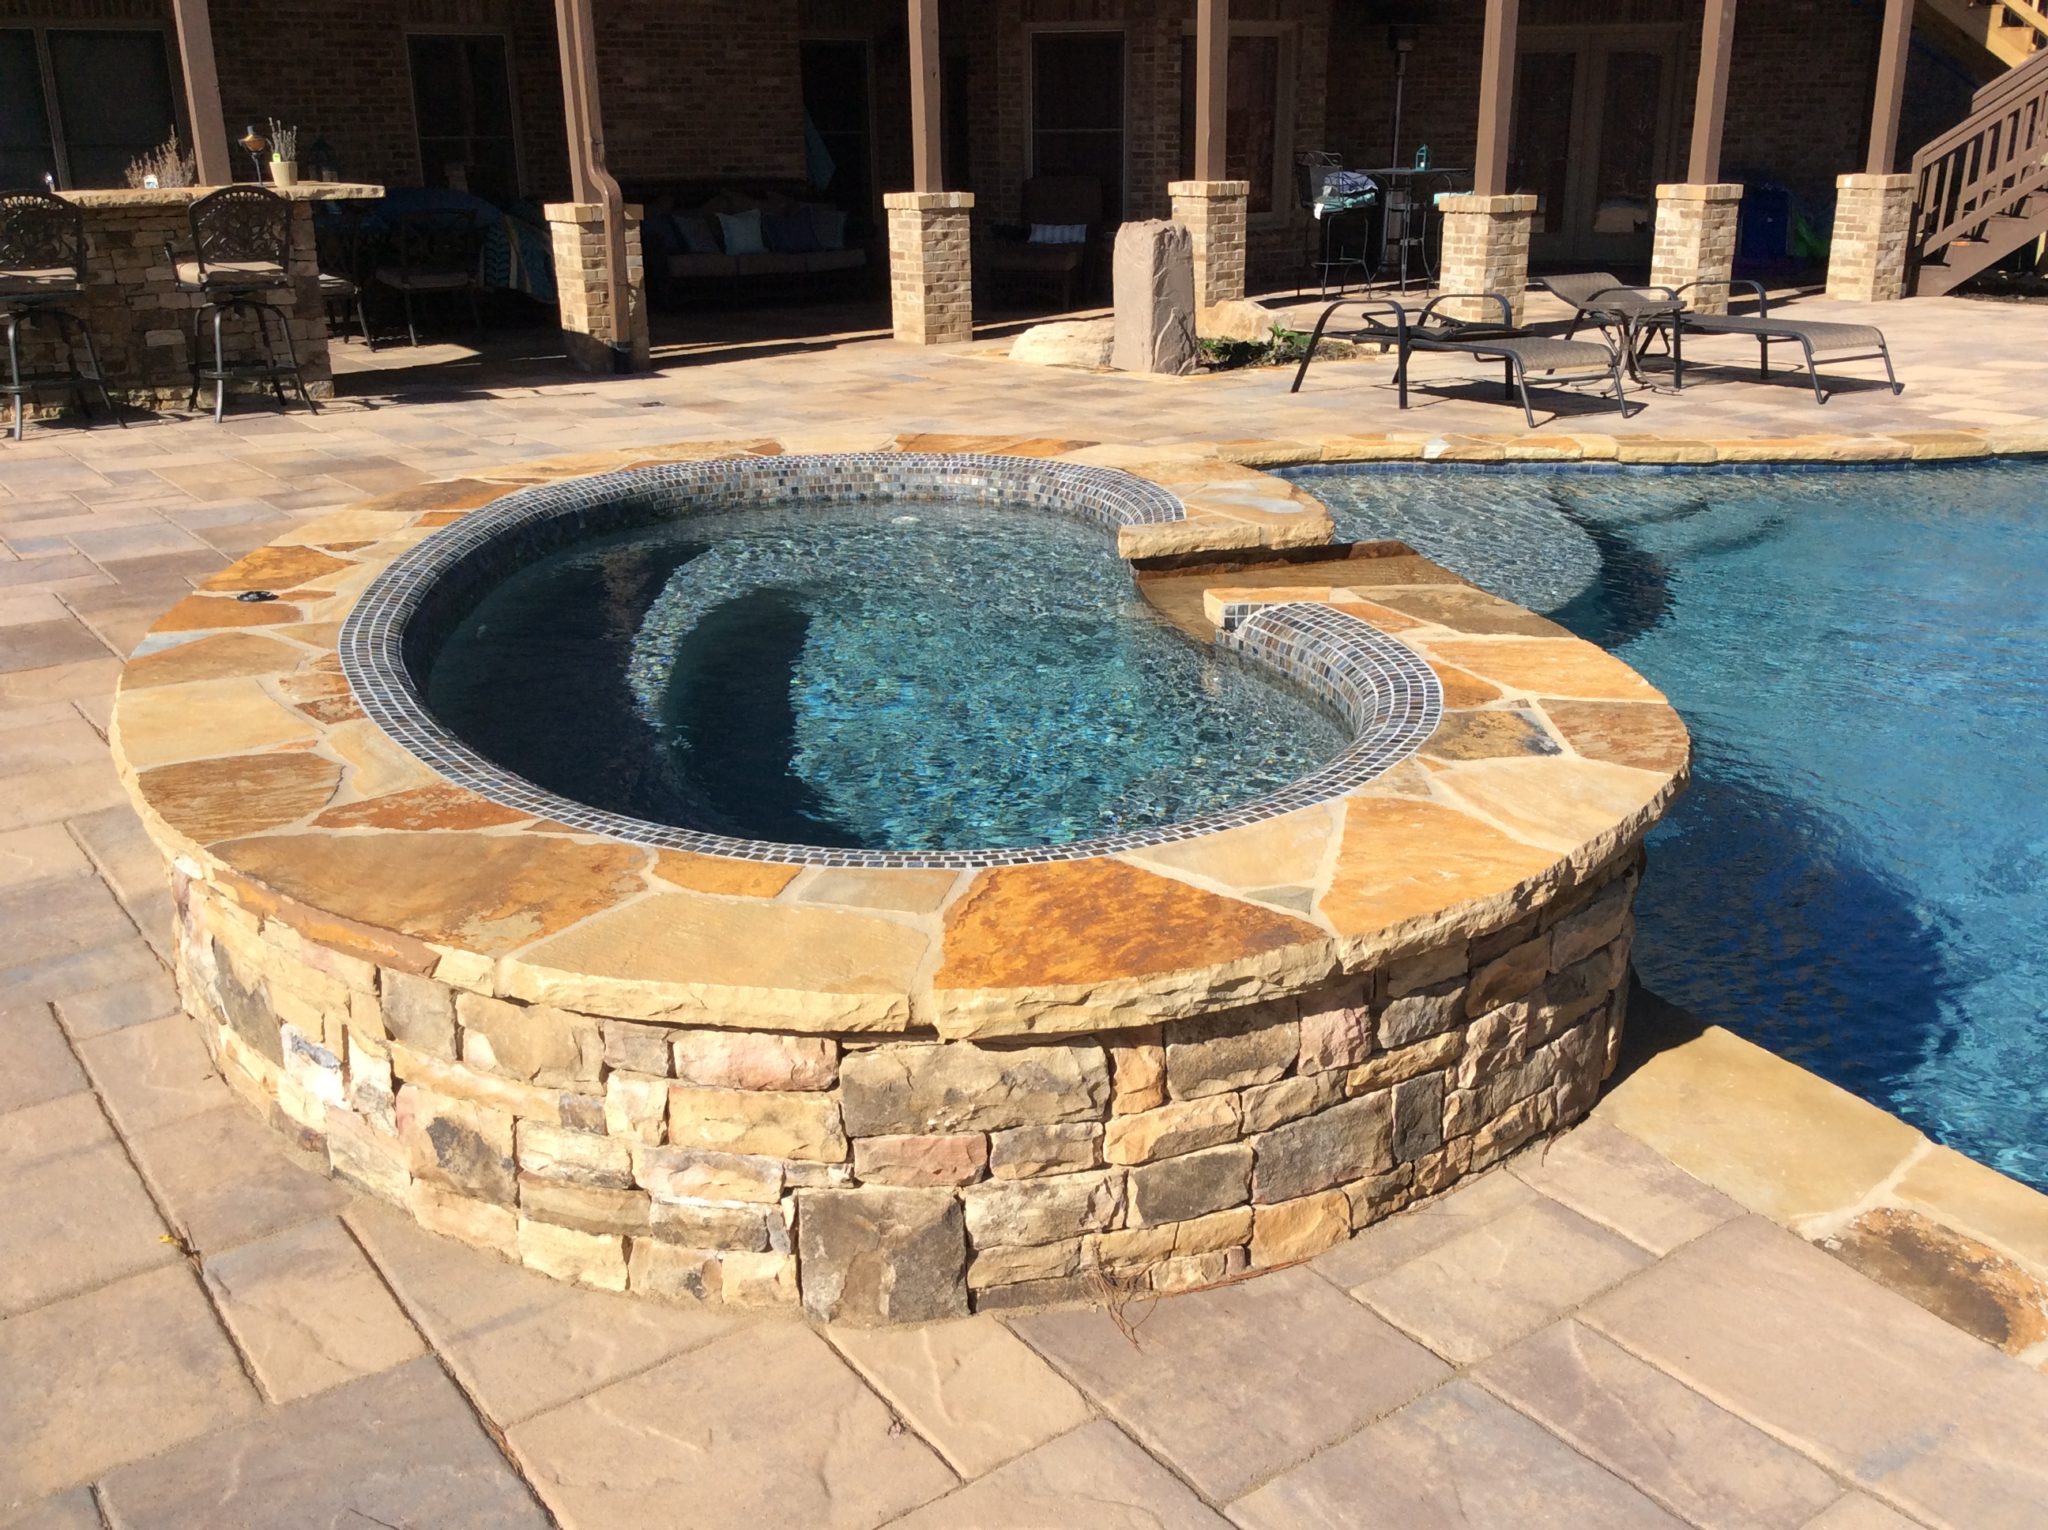 A kidney-shaped spa with a gentle spillover, offering a serene and luxurious addition to your outdoor sanctuary.